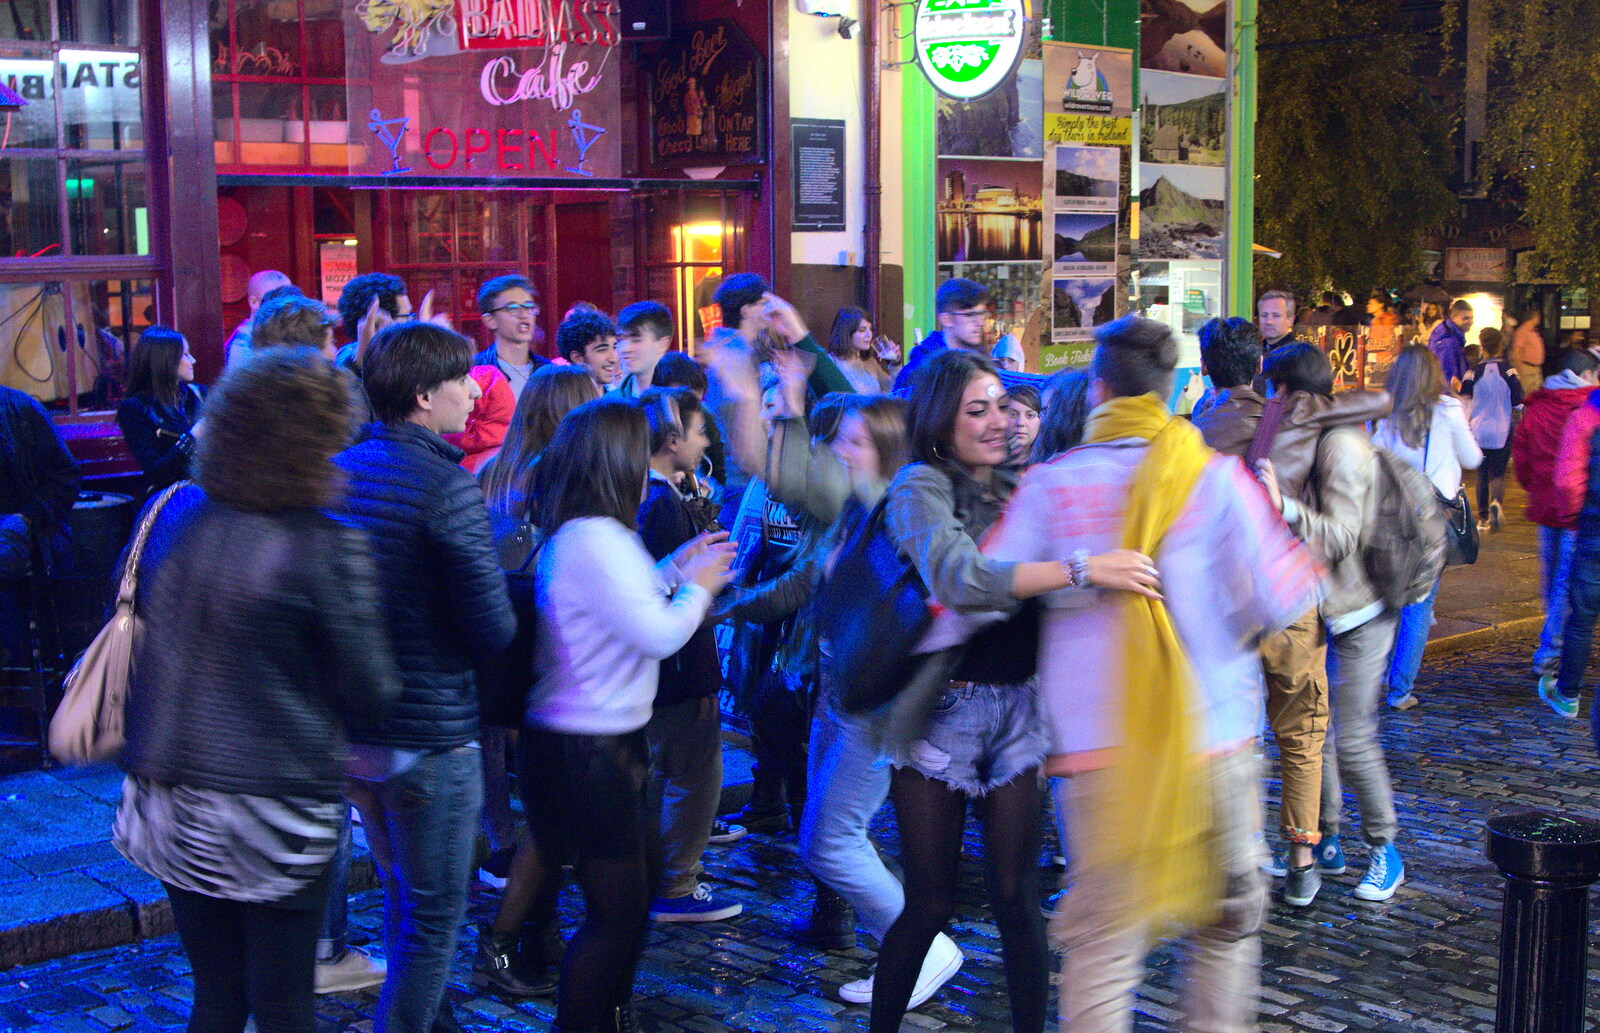 A group of foreign students go wild from A Night Out in Dublin, County Dublin, Ireland - 9th August 2014